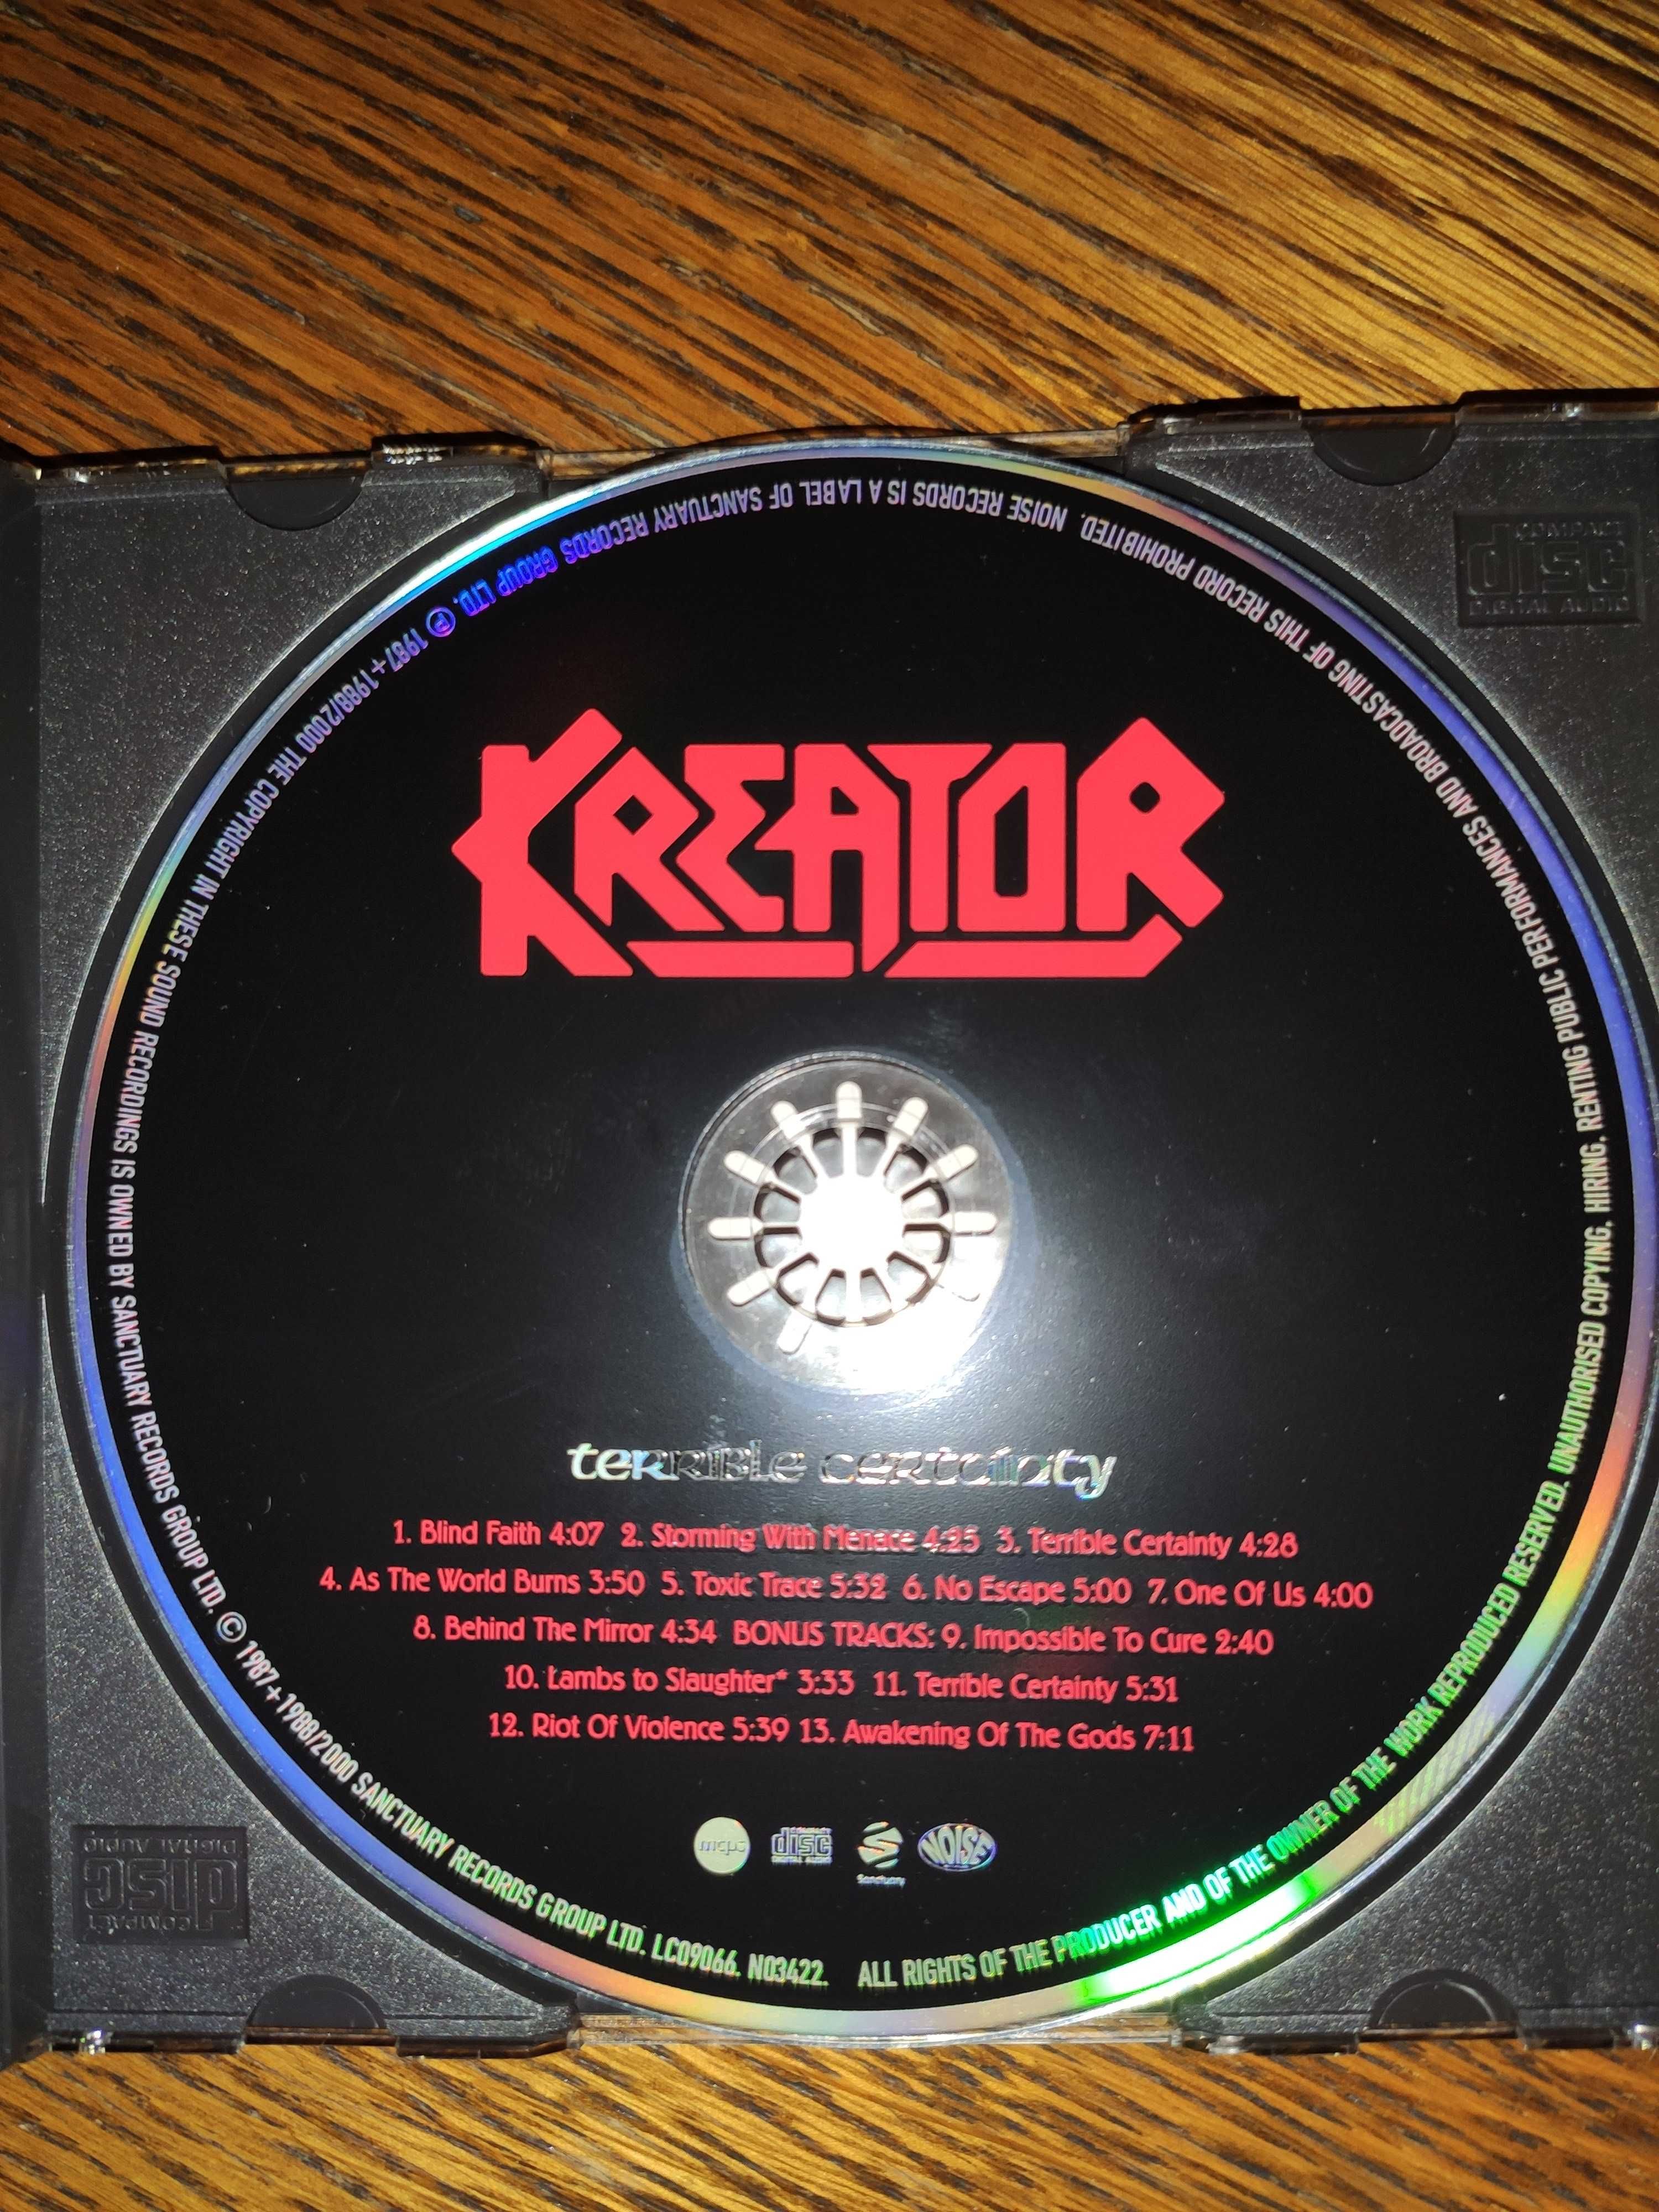 Kreator - Terrible certainty, CD 2000, out of the dark